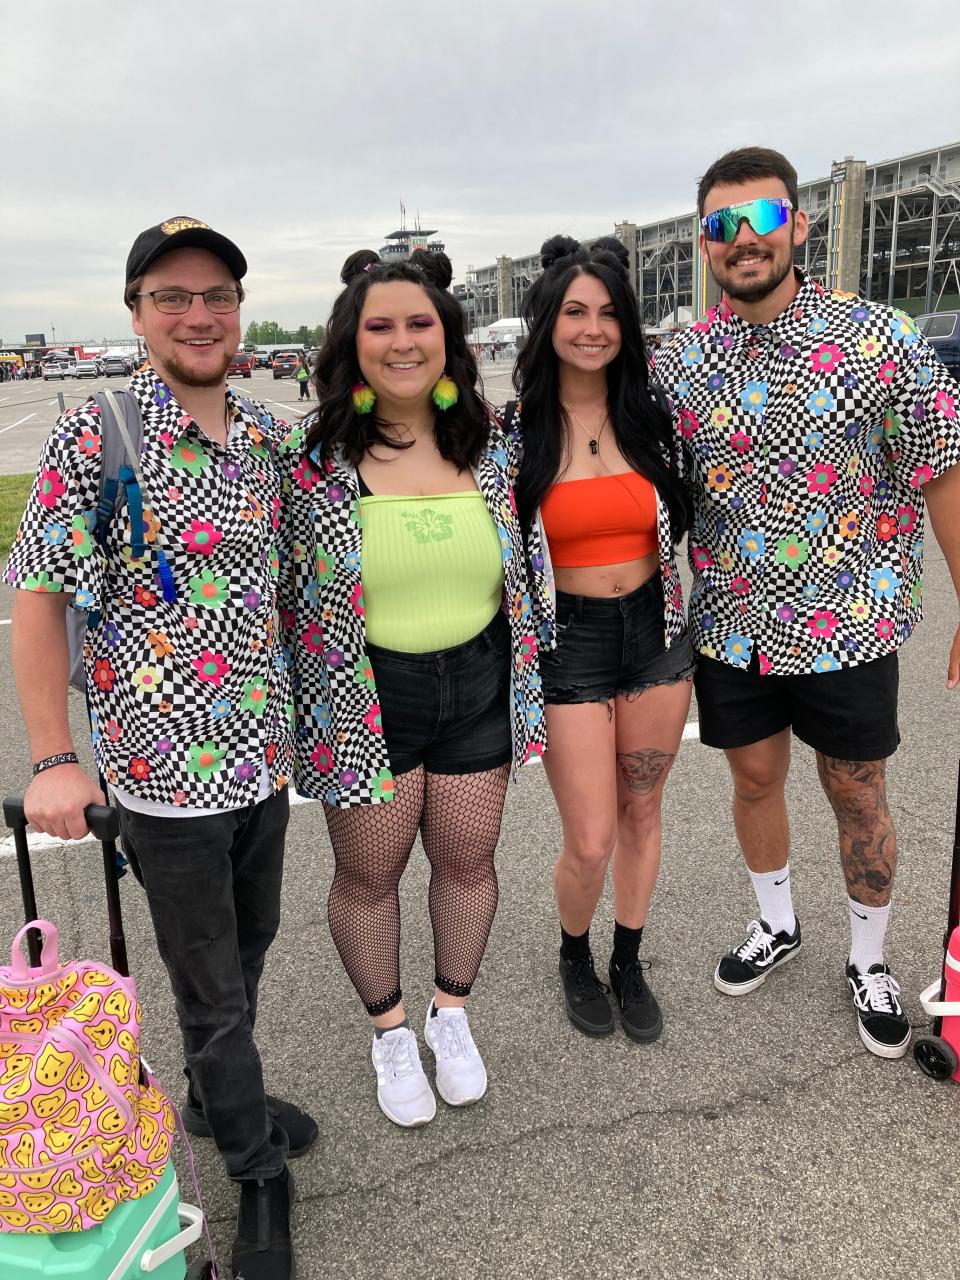 From left, Rex Buckley and Taylor Hobbs of Fishers and Ashley Smith and Zayhn Enfield of Elkhart, were ready to head into the 2023 Snake Pit concert.